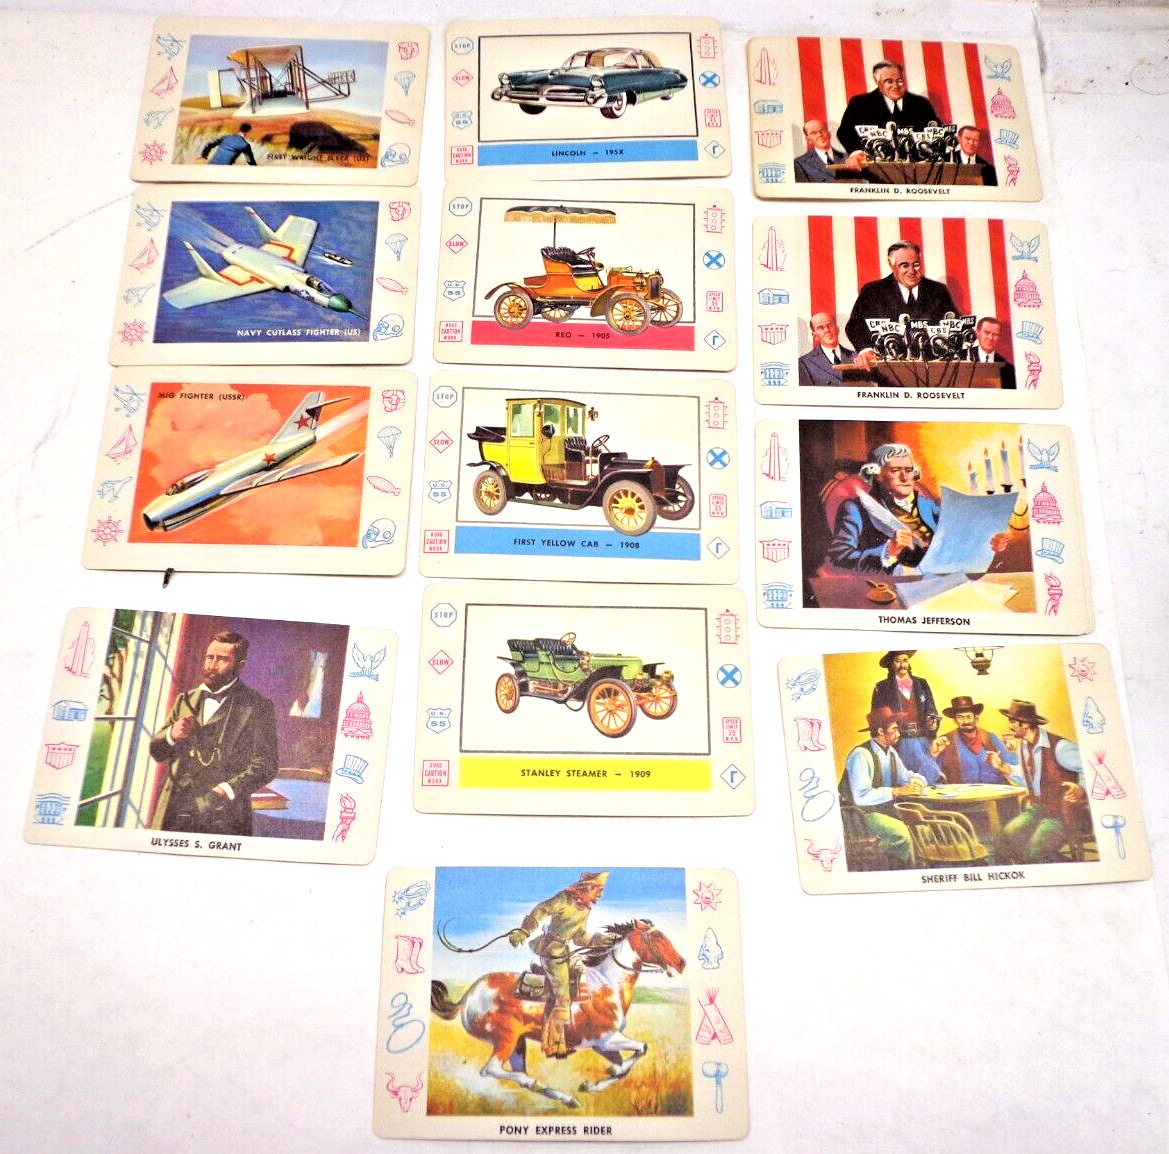 13 1958 CARDO MIXED LOT TRADING CARDS PRESIDENTS AUTOMOBILE PLANES COWBOY INDIAN